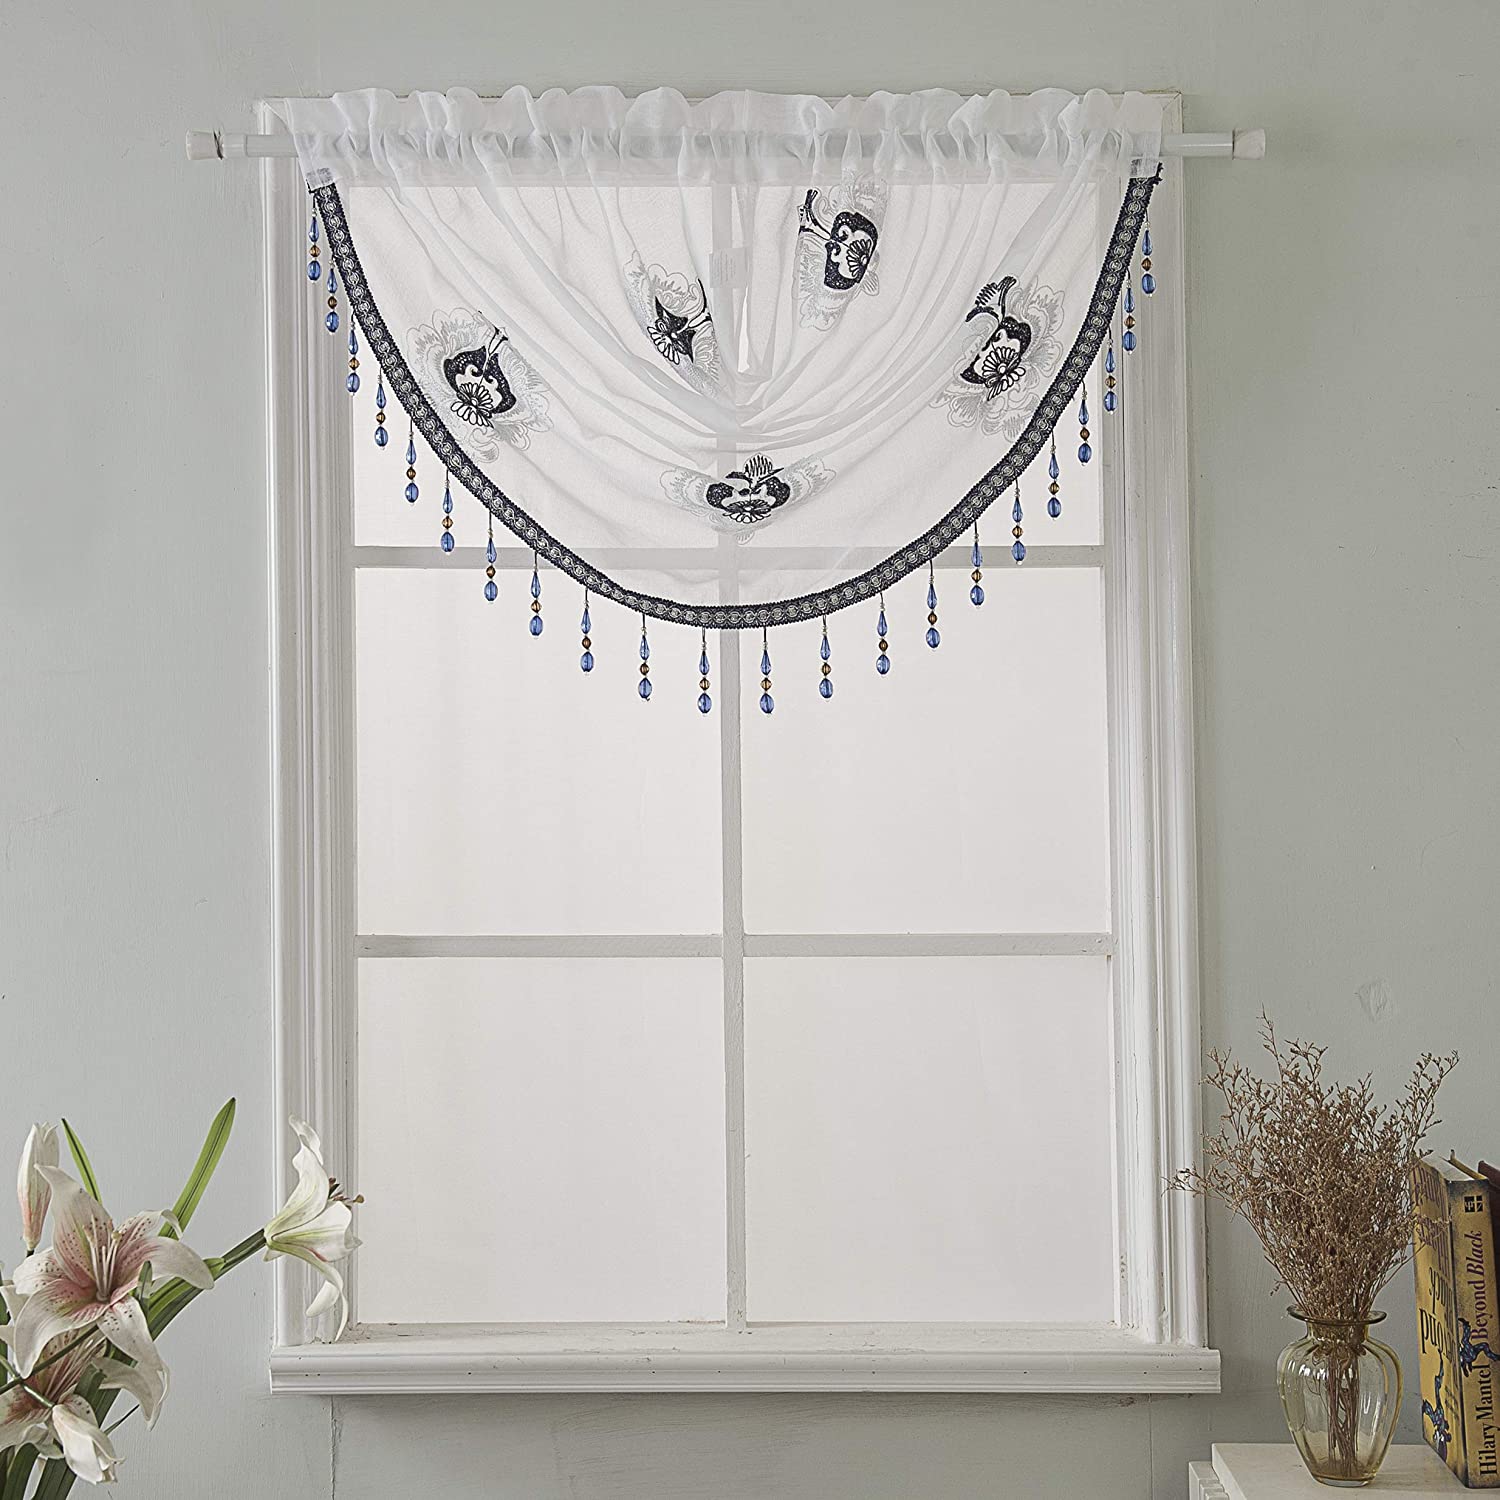 Oslo Embroidered 47 x 37 in. Swag Window Valance - Linen Universe Co.